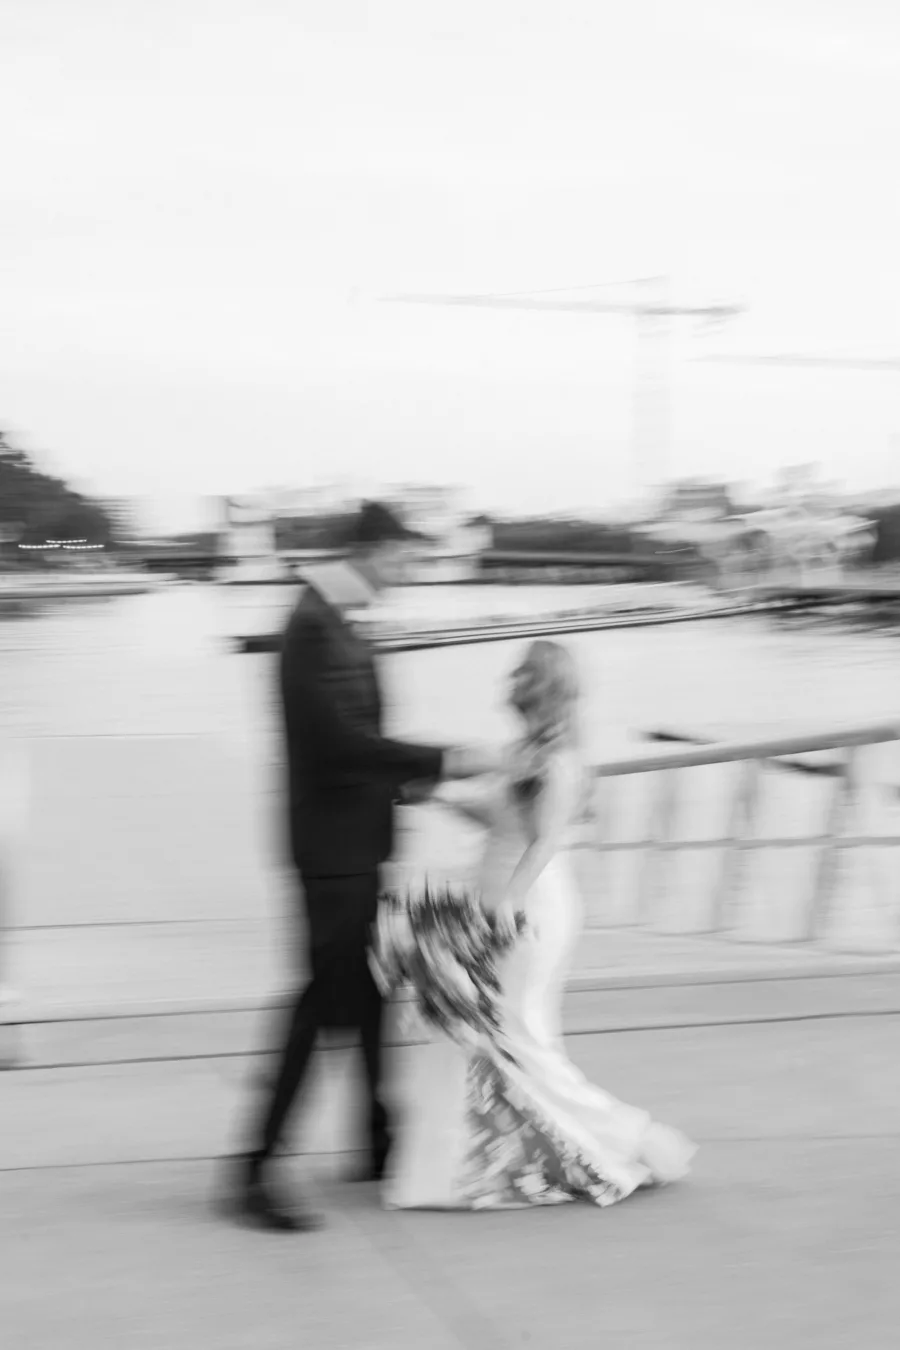 Blurry Bride and Groom Black and White Wedding Portrait | Tampa Bay Photographer Dewitt For Love Photography